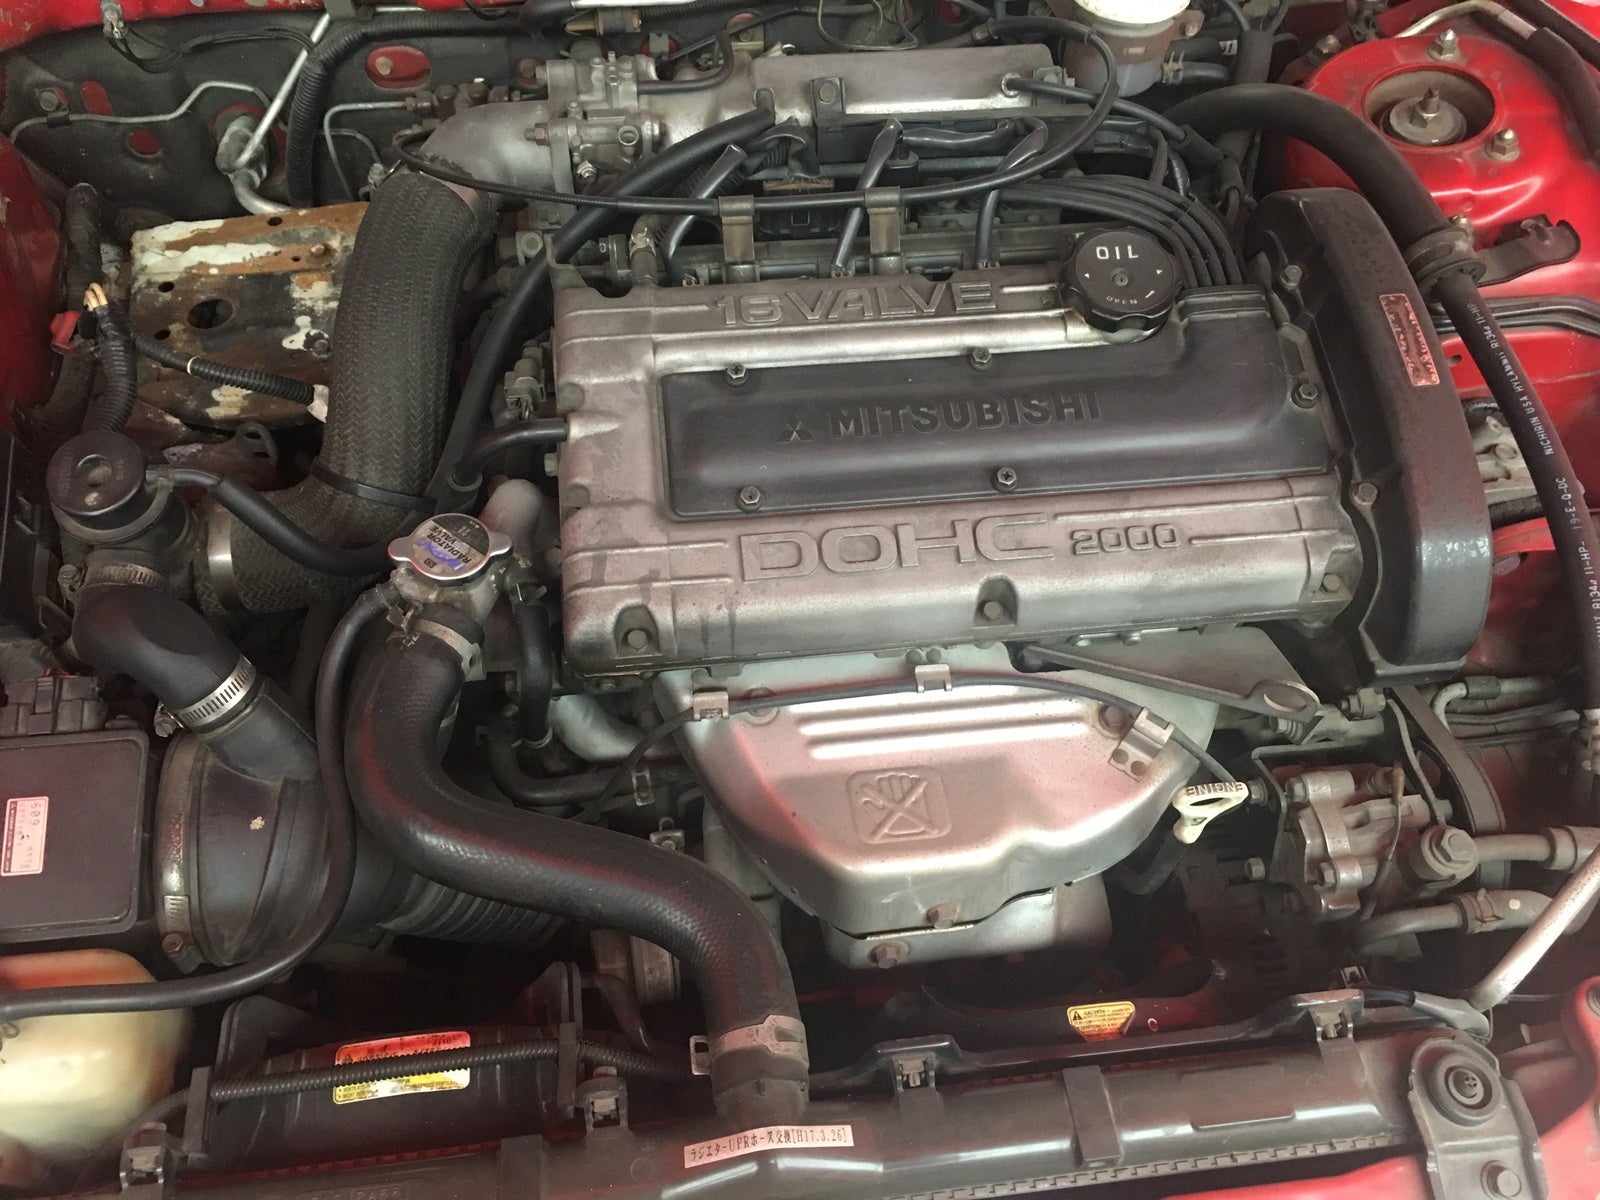 Mitsubishi Eclipse Questions - What model or engine is in this Eclipse -  CarGurus